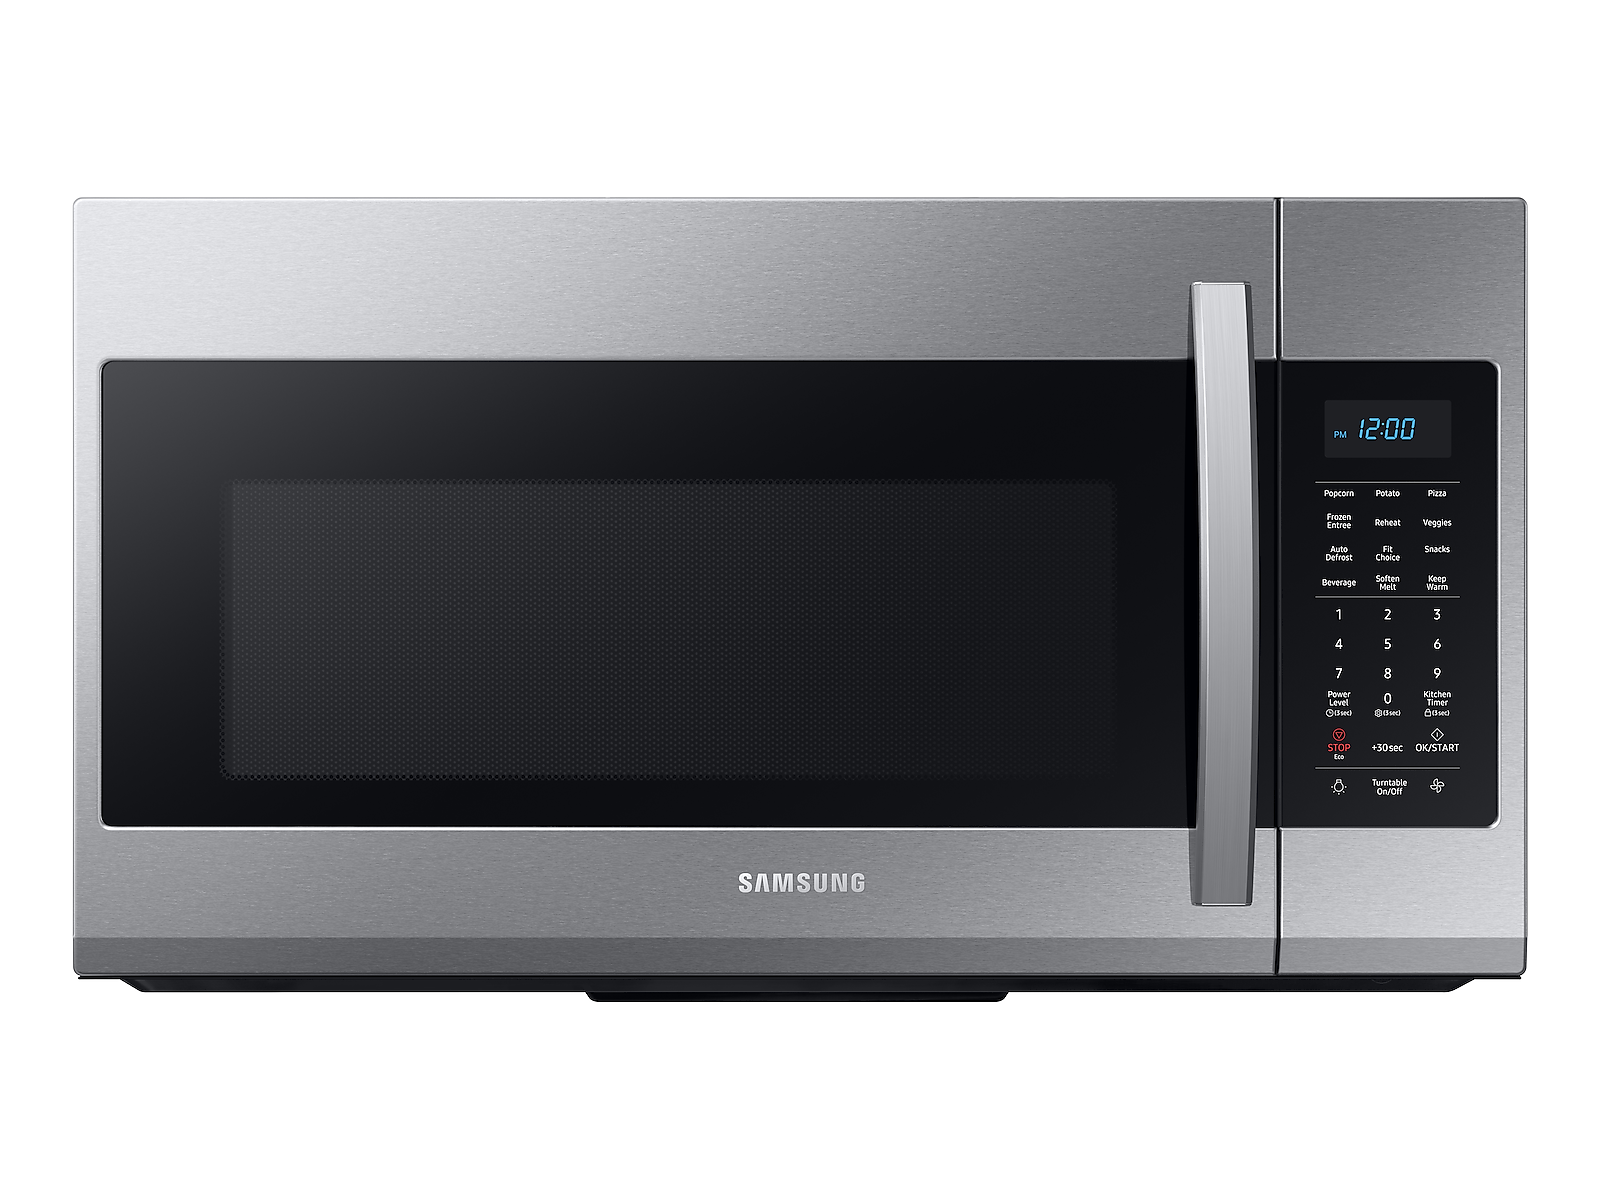 Samsung 1.9 cu. ft. Over-the-Range Microwave with Sensor Cooking in Stainless Steel(ME19R7041FS/AA) photo